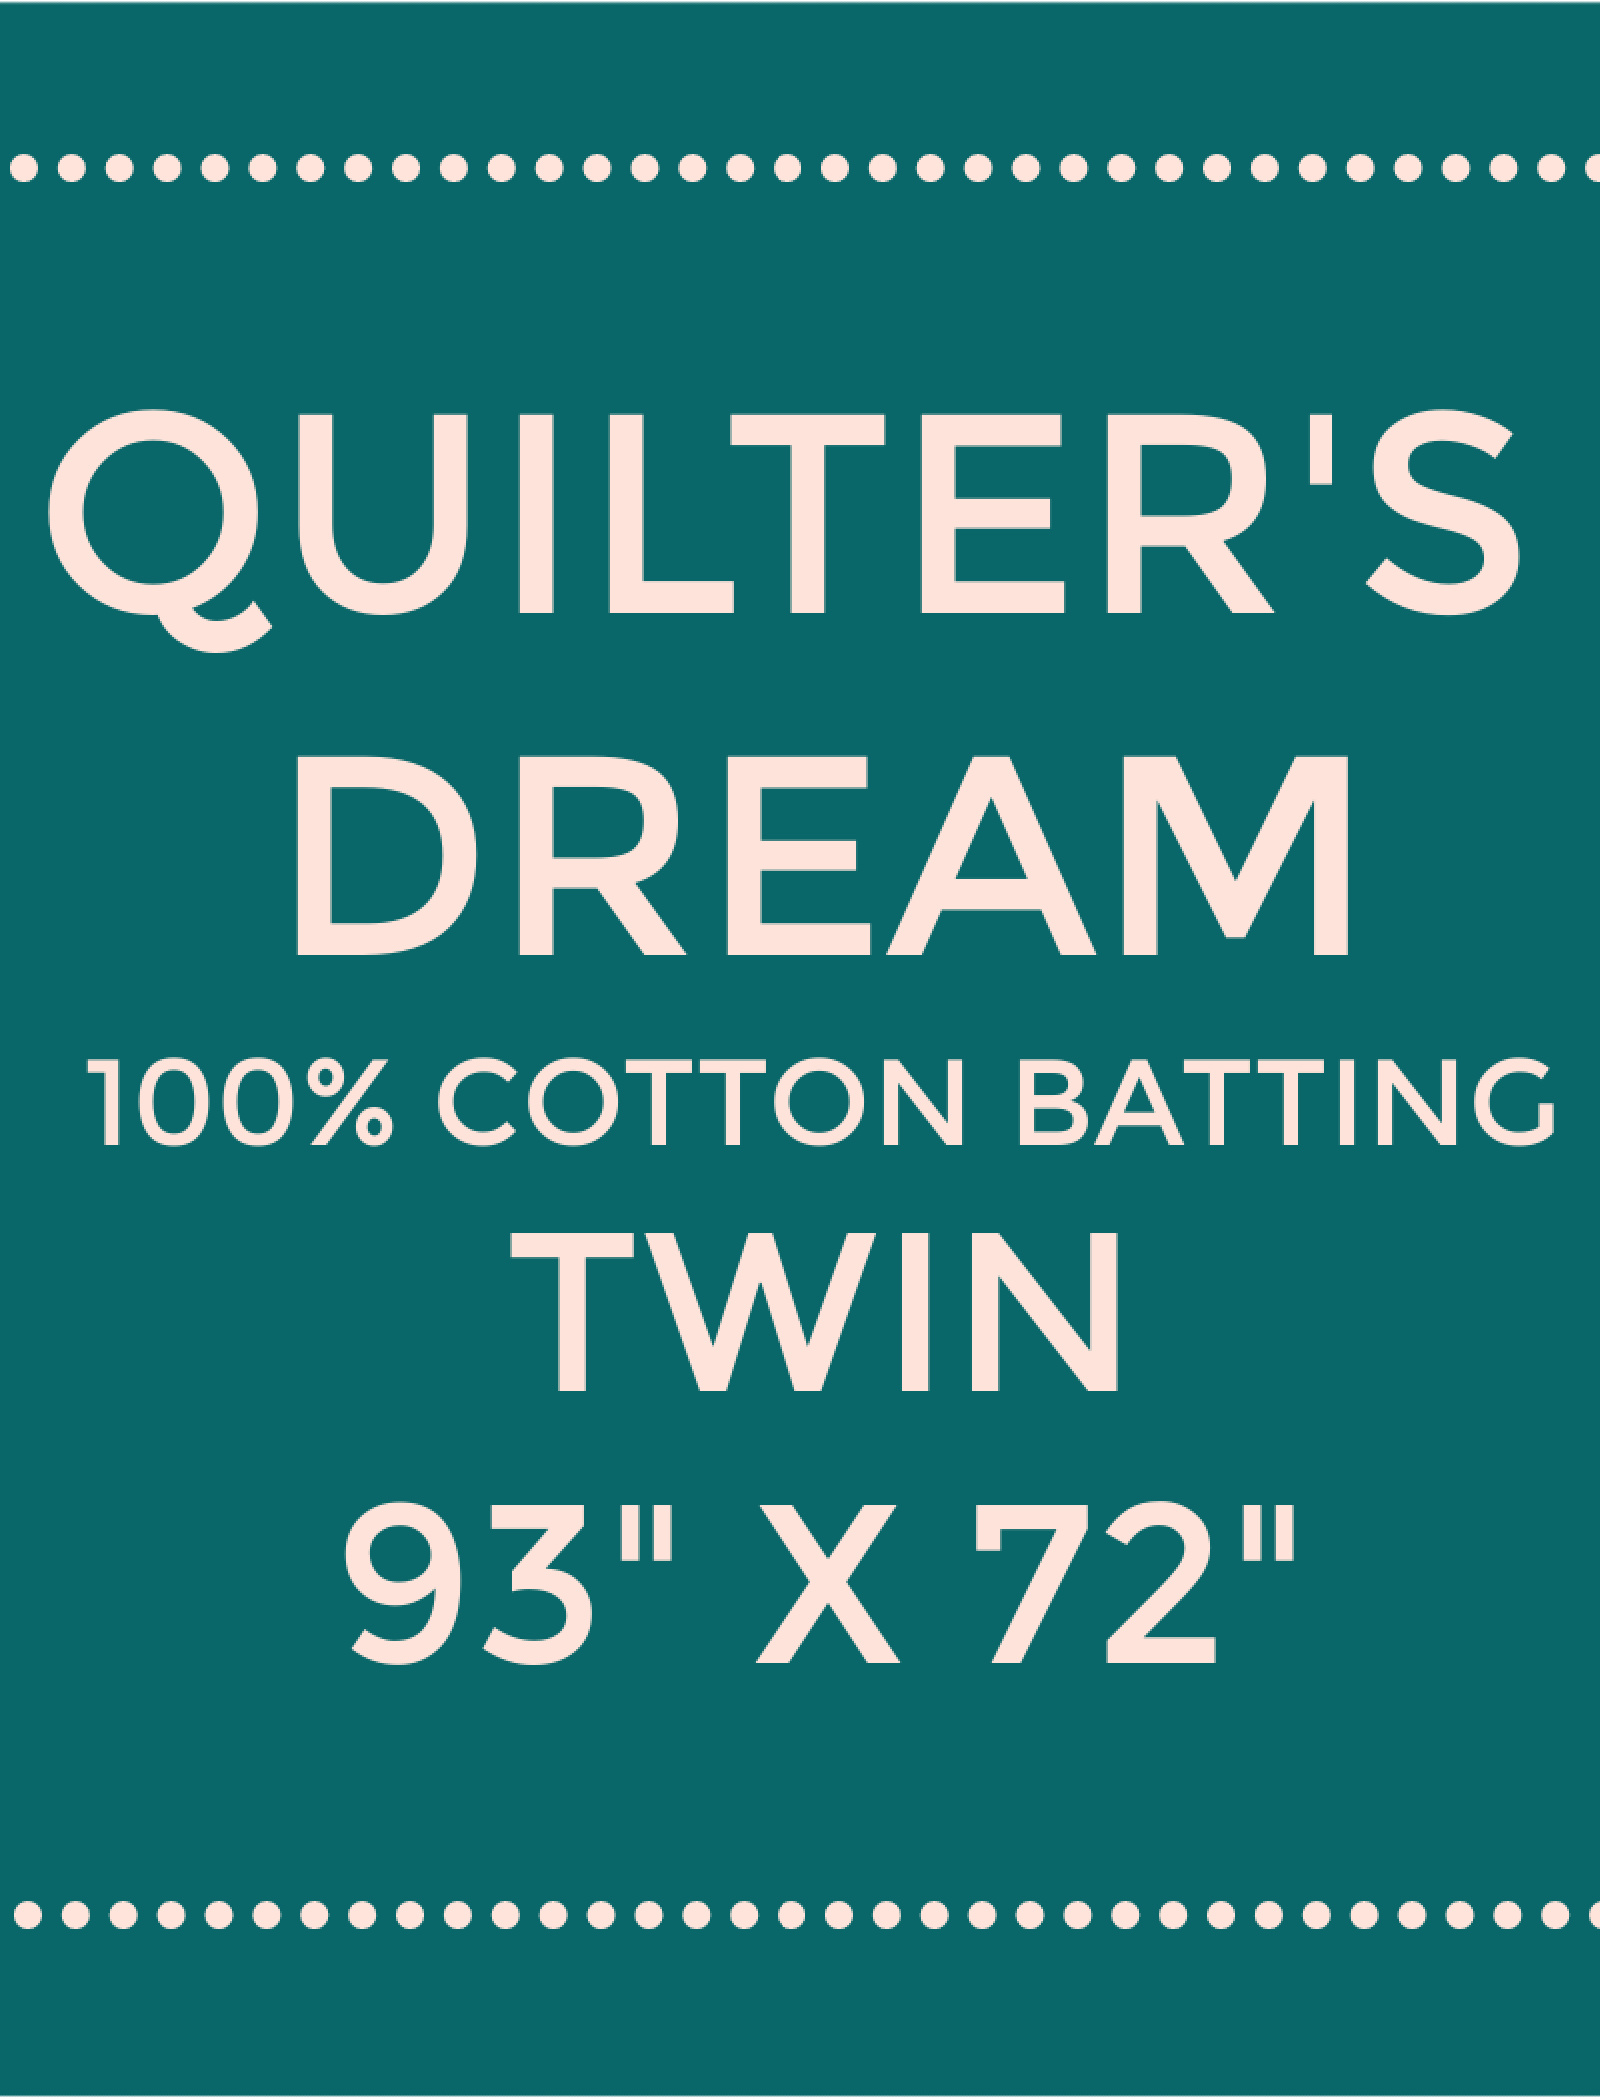 Quilters Dream Cotton Batting - Natural Select - Twin 93 x 72 -  Stonemountain & Daughter Fabrics